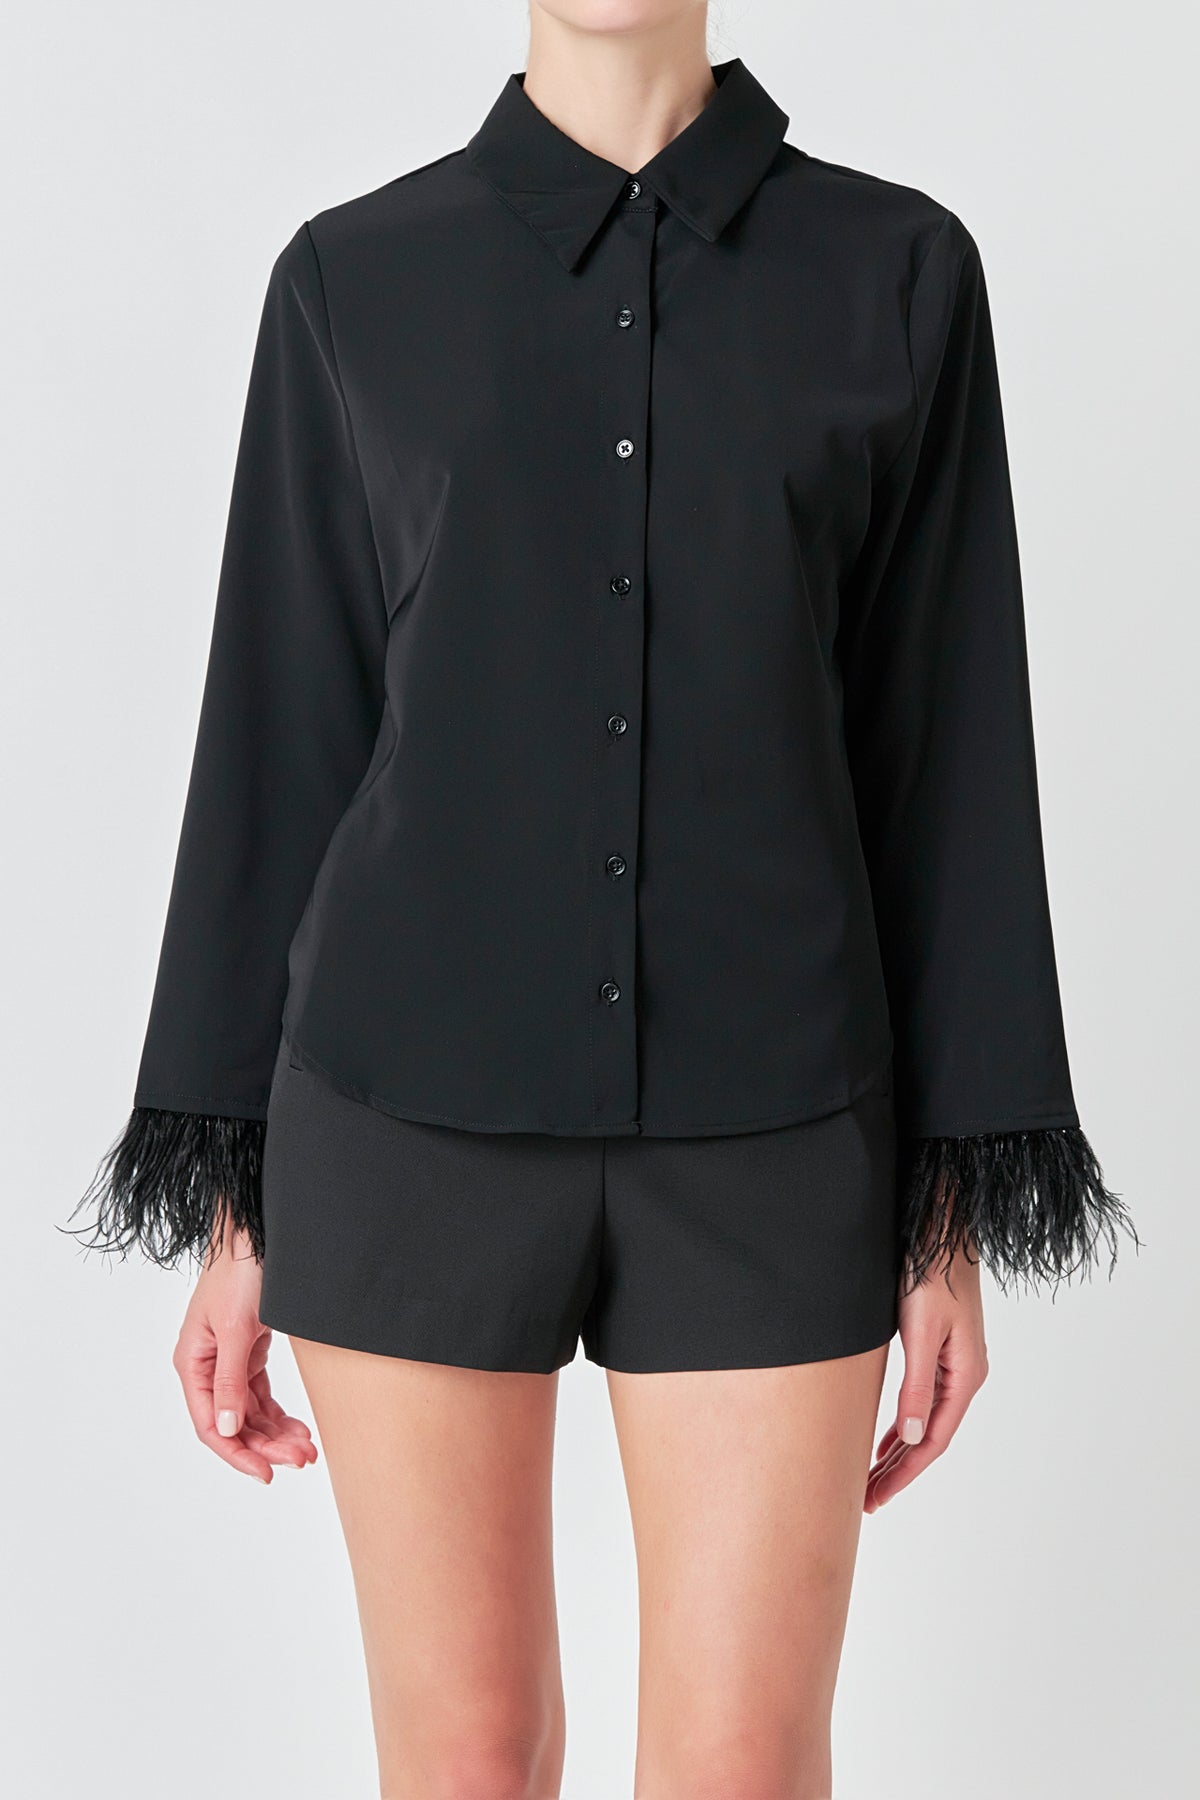 ENDLESS ROSE - Feather Trimmed Fitted Blouse Top - TOPS available at Objectrare